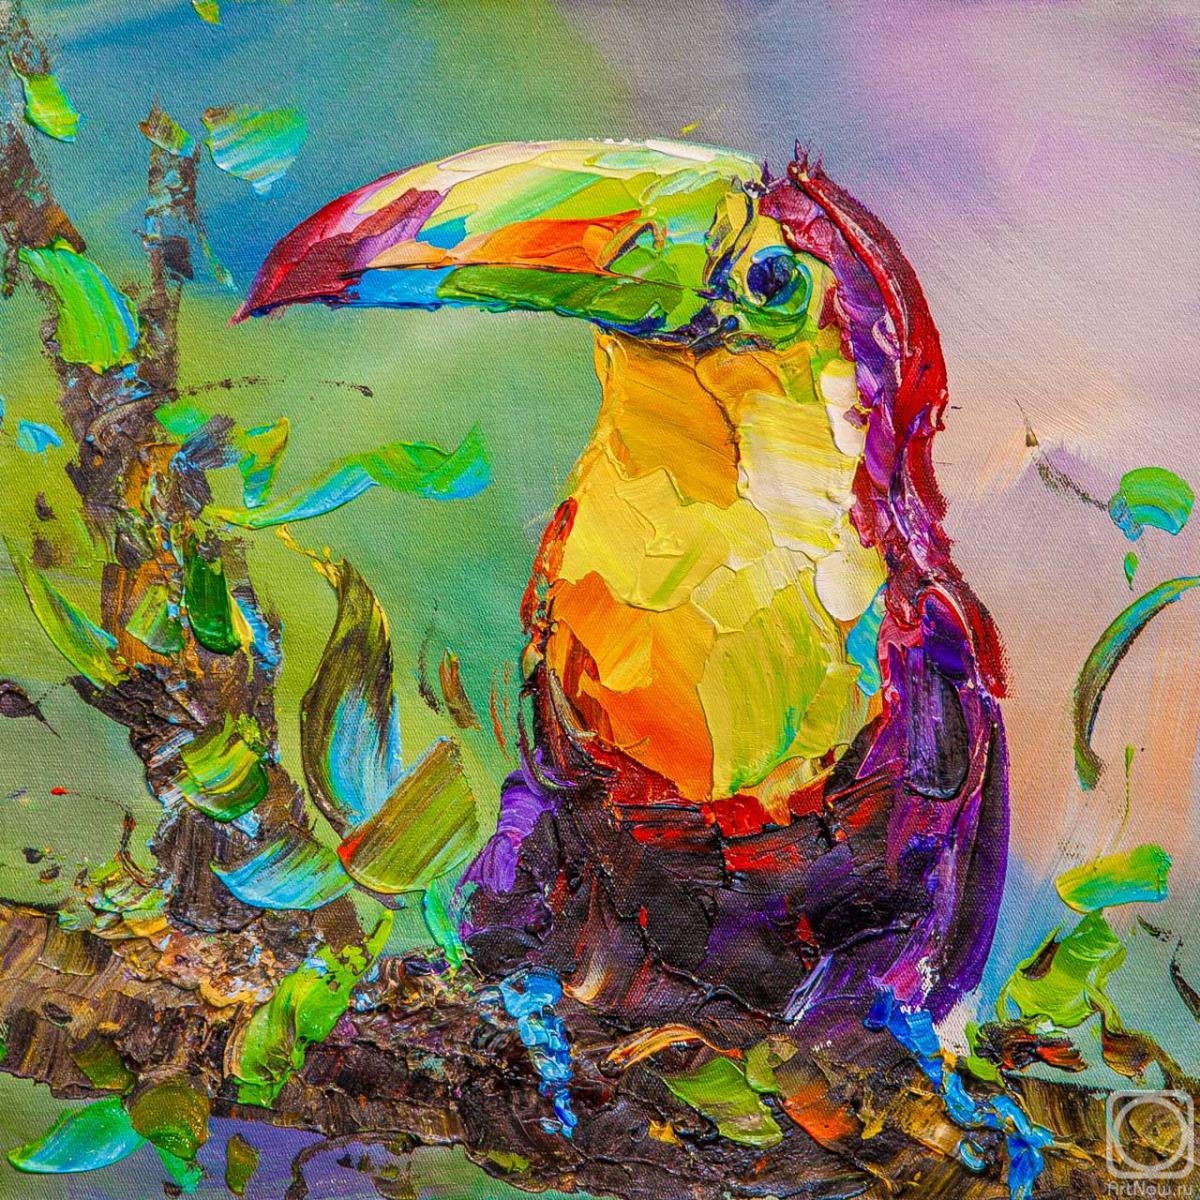 Rodries Jose. It's all about beauty. Toucan